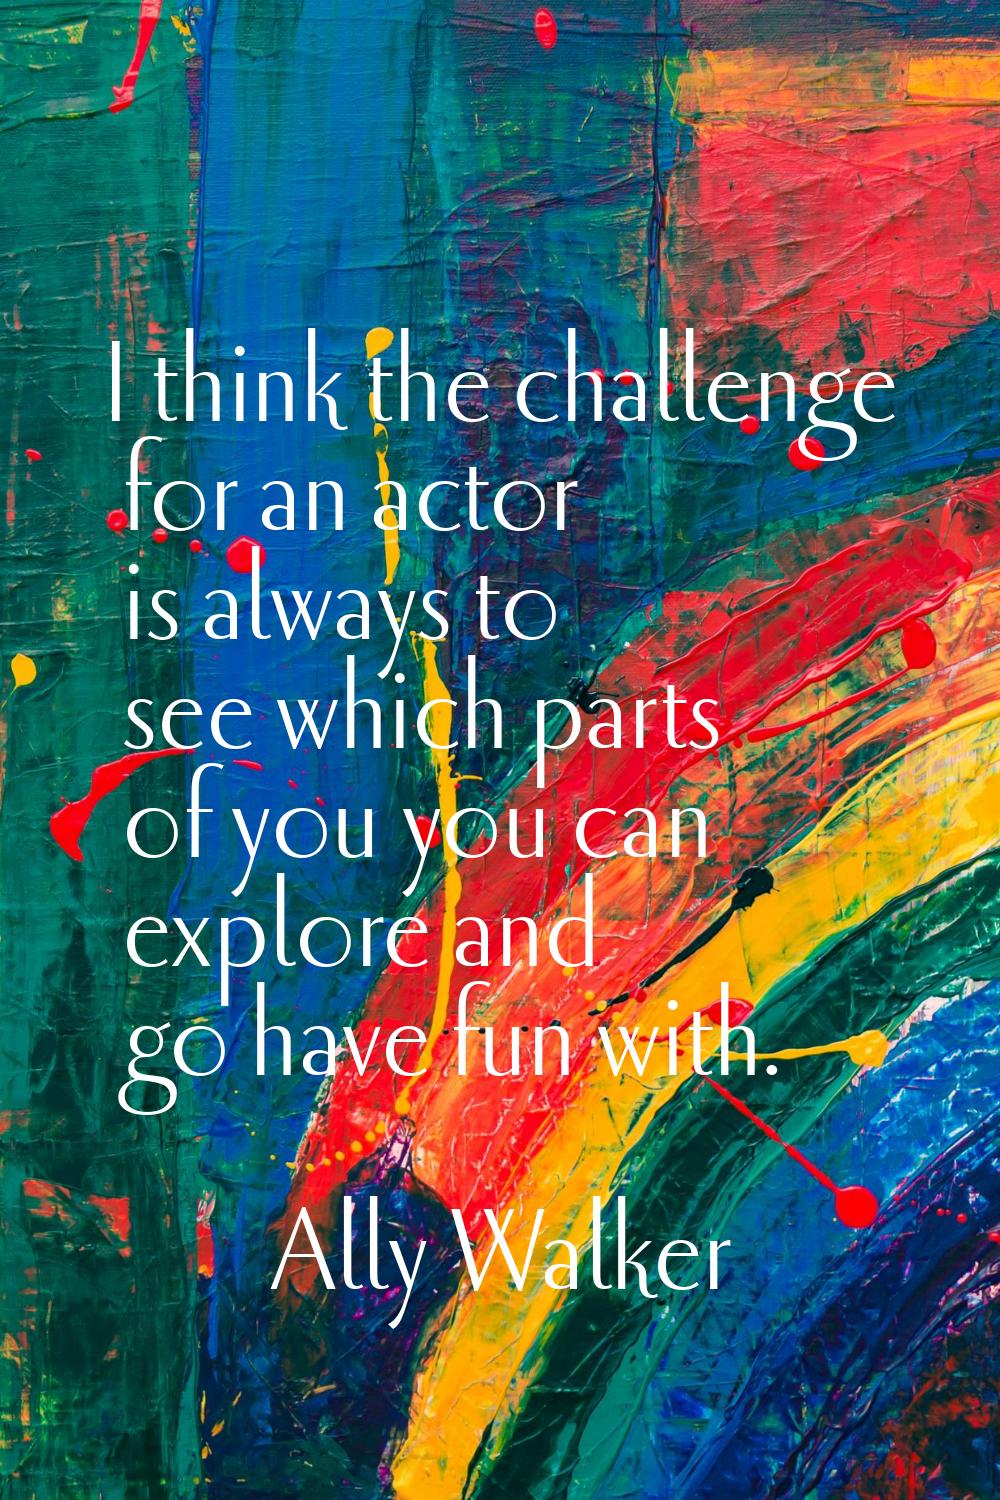 I think the challenge for an actor is always to see which parts of you you can explore and go have 